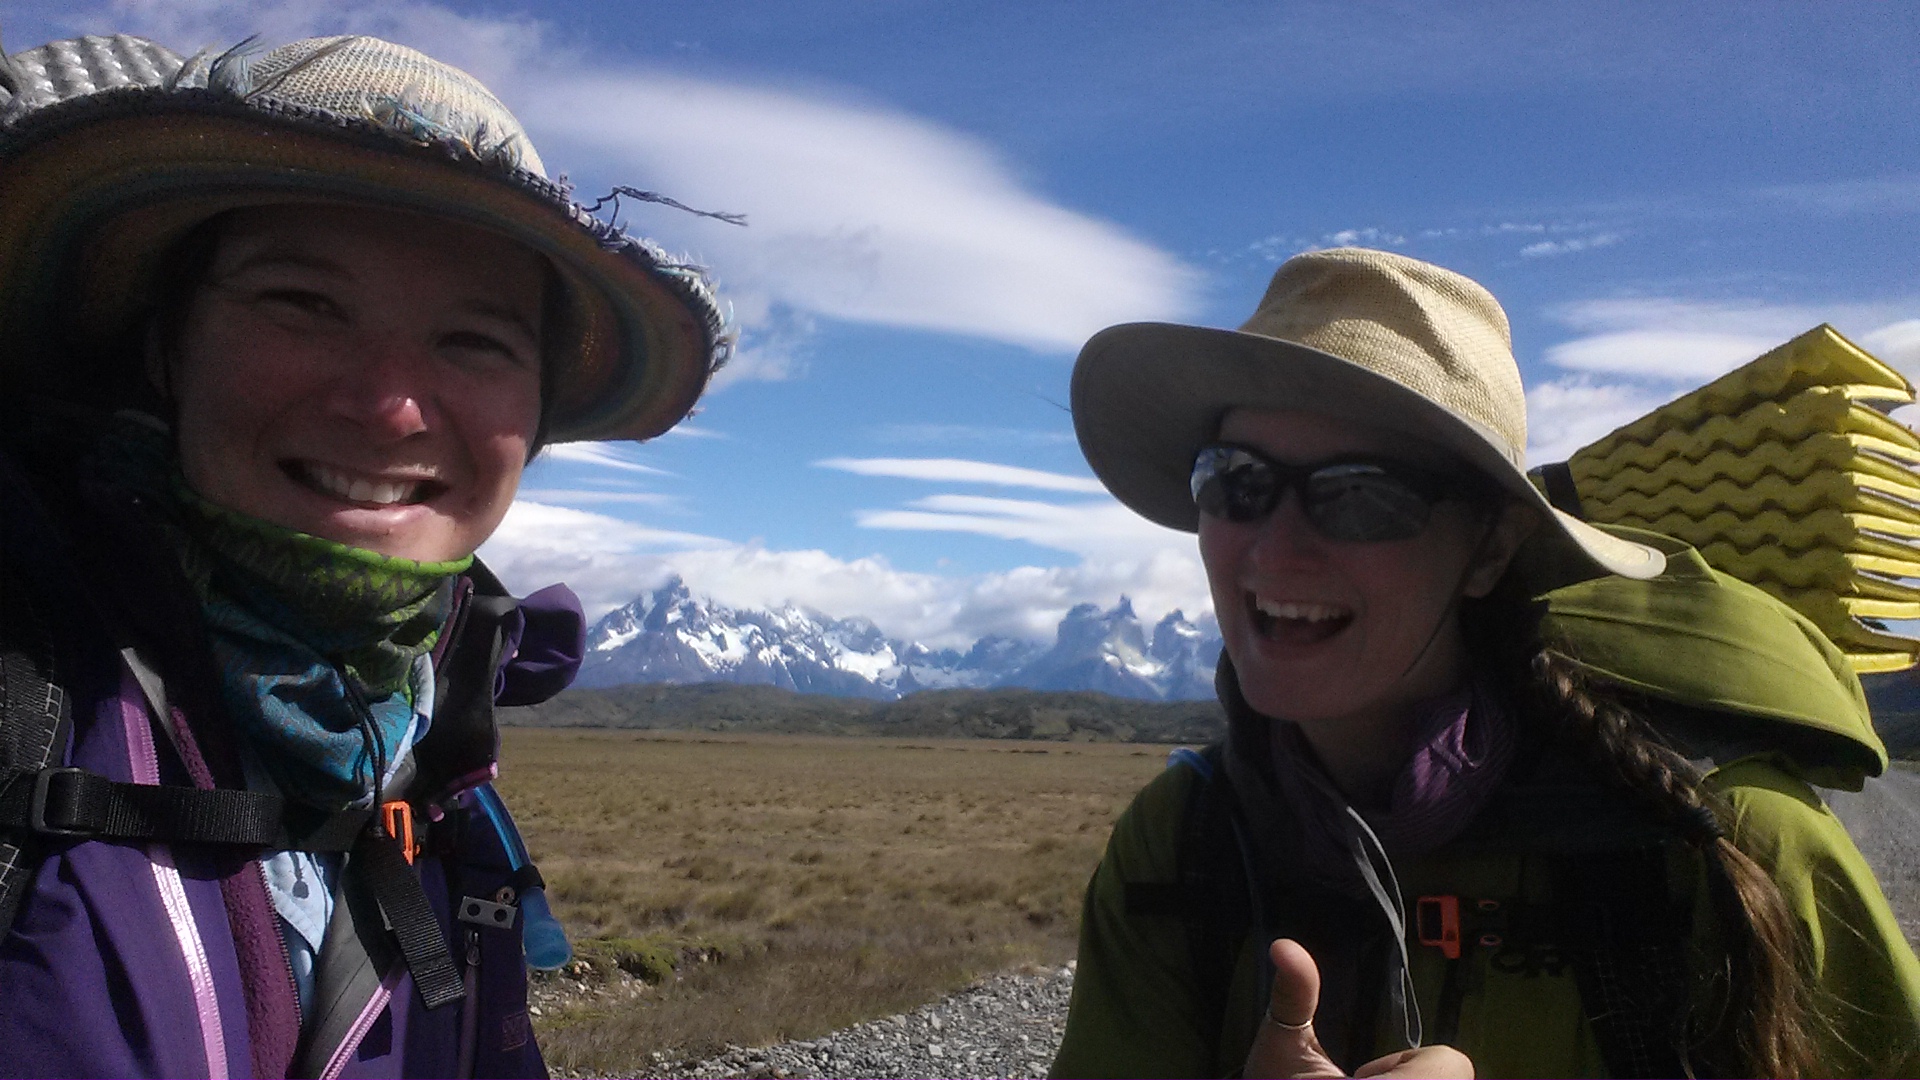 Us and Torres del Paine